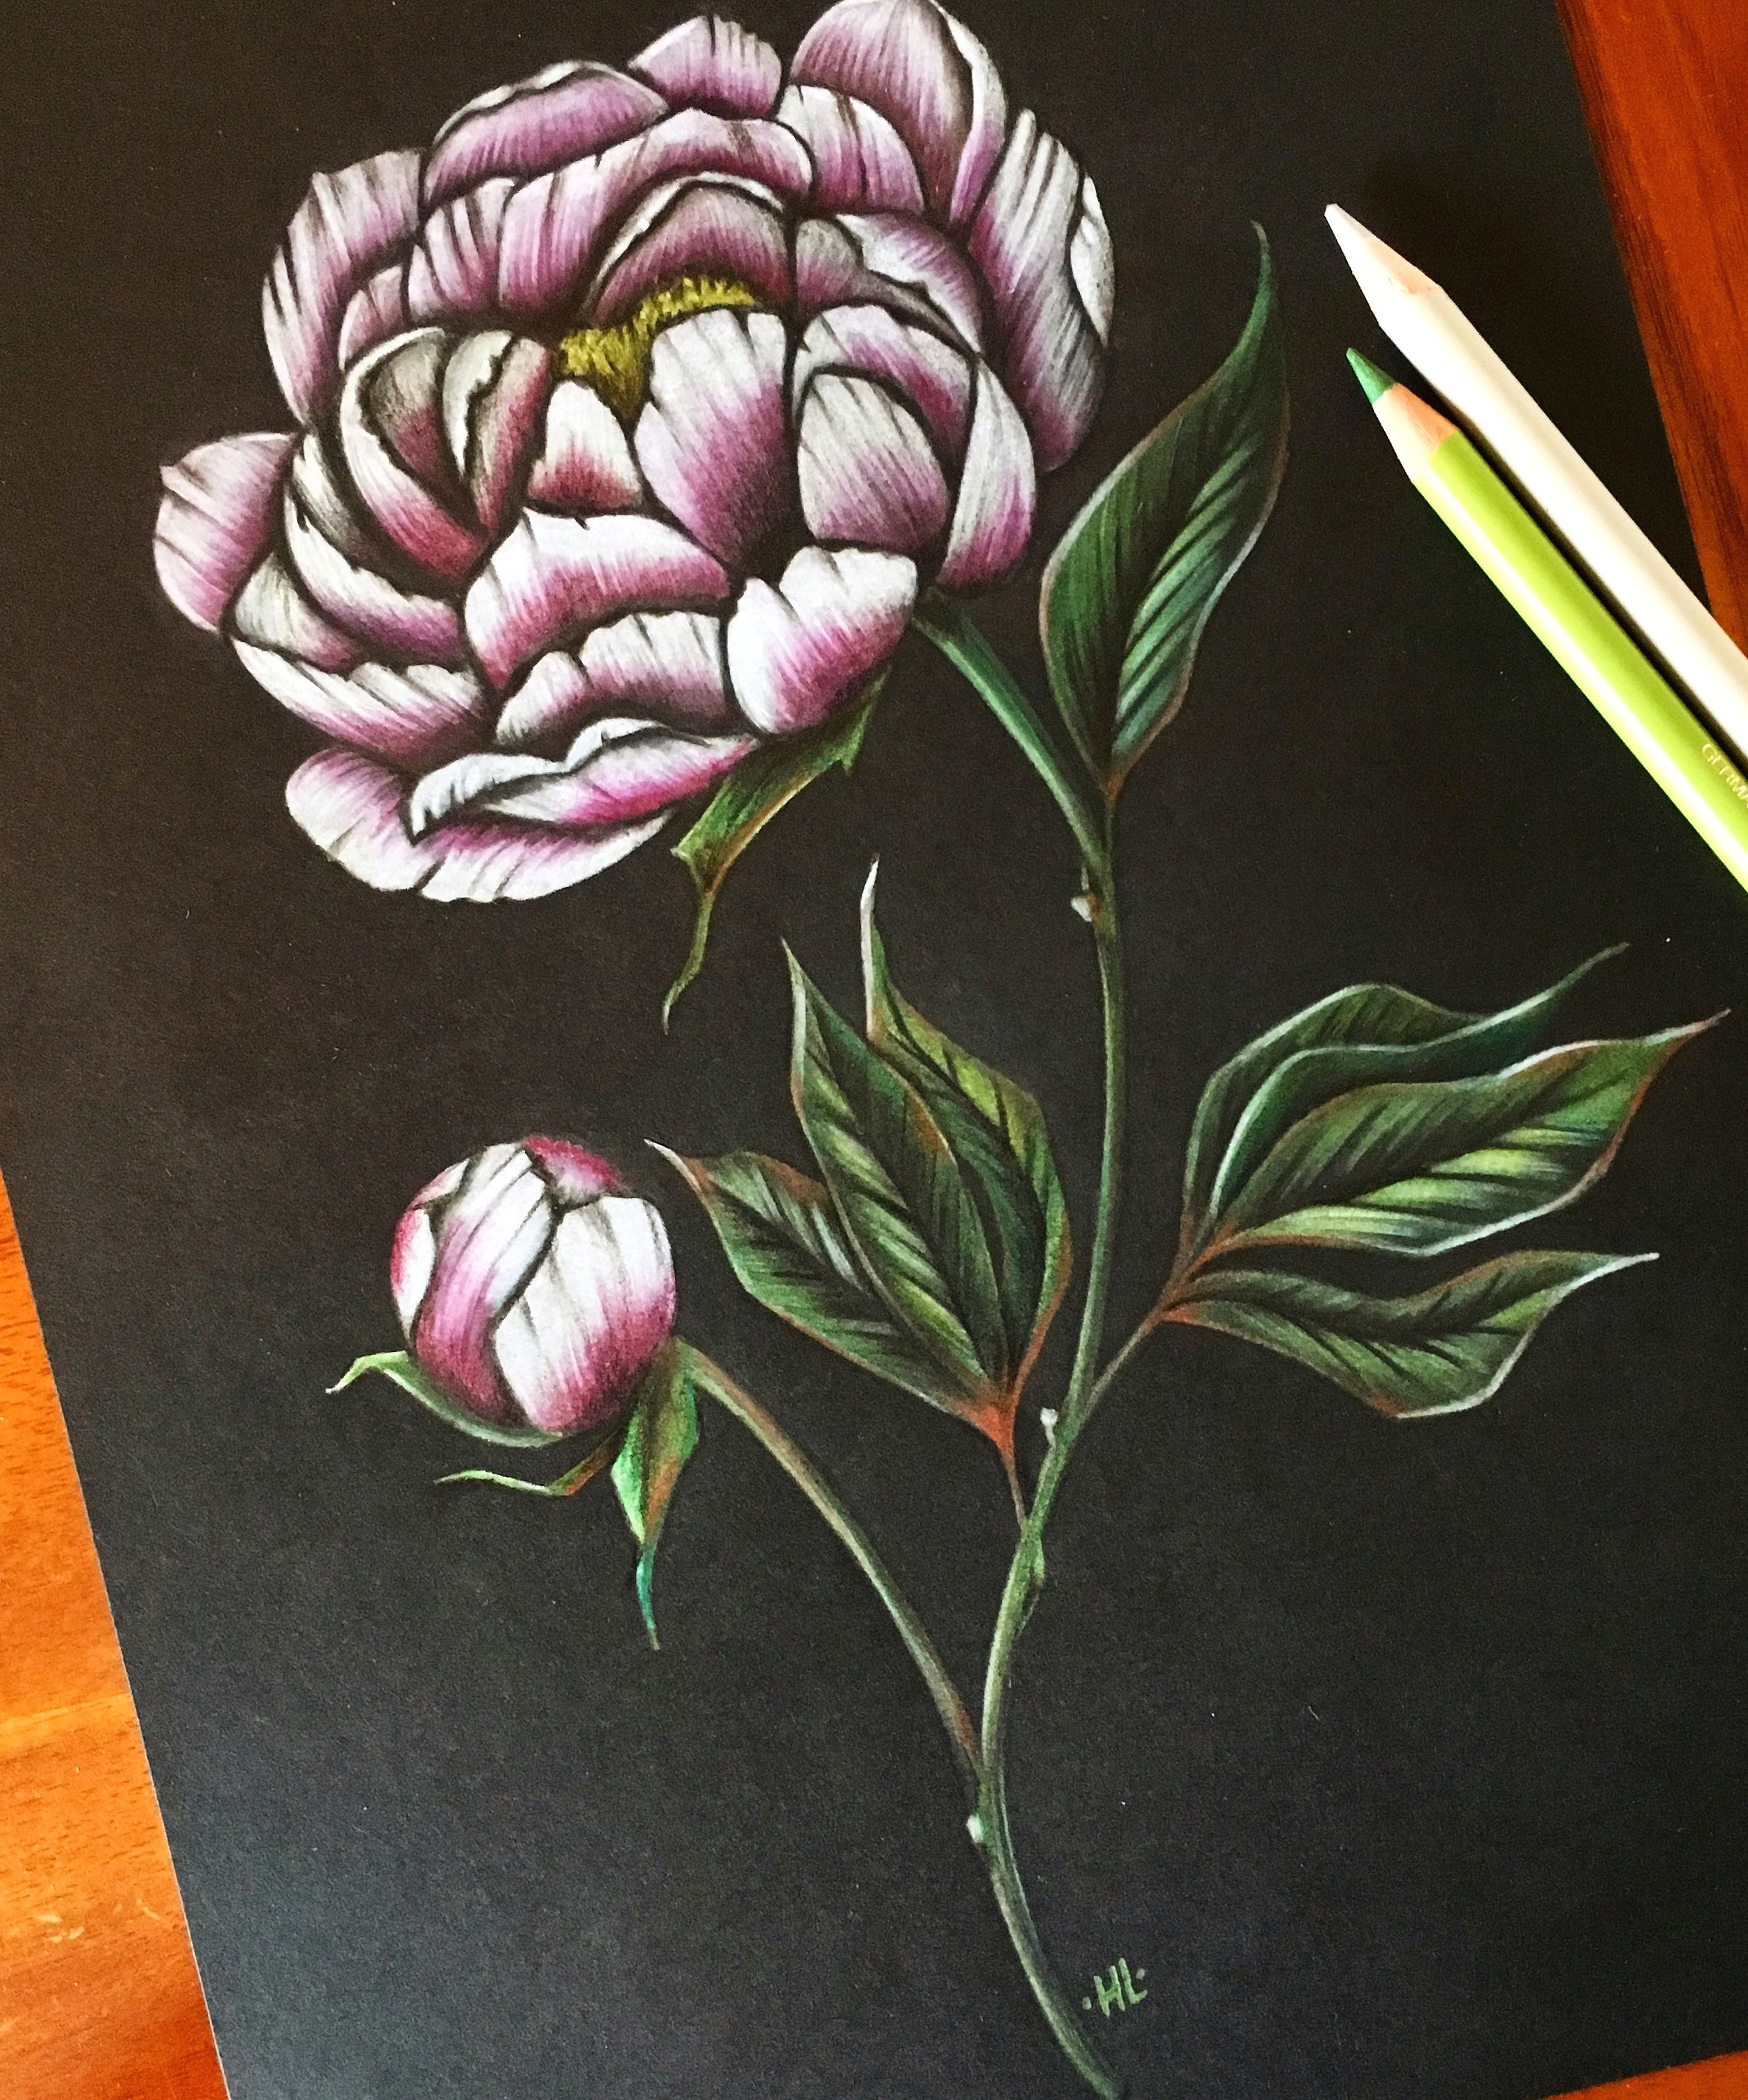 Drawings Of Flowers with Stems Peony Art Peonies Drawing Flower Pencil Art Coloured Pencil